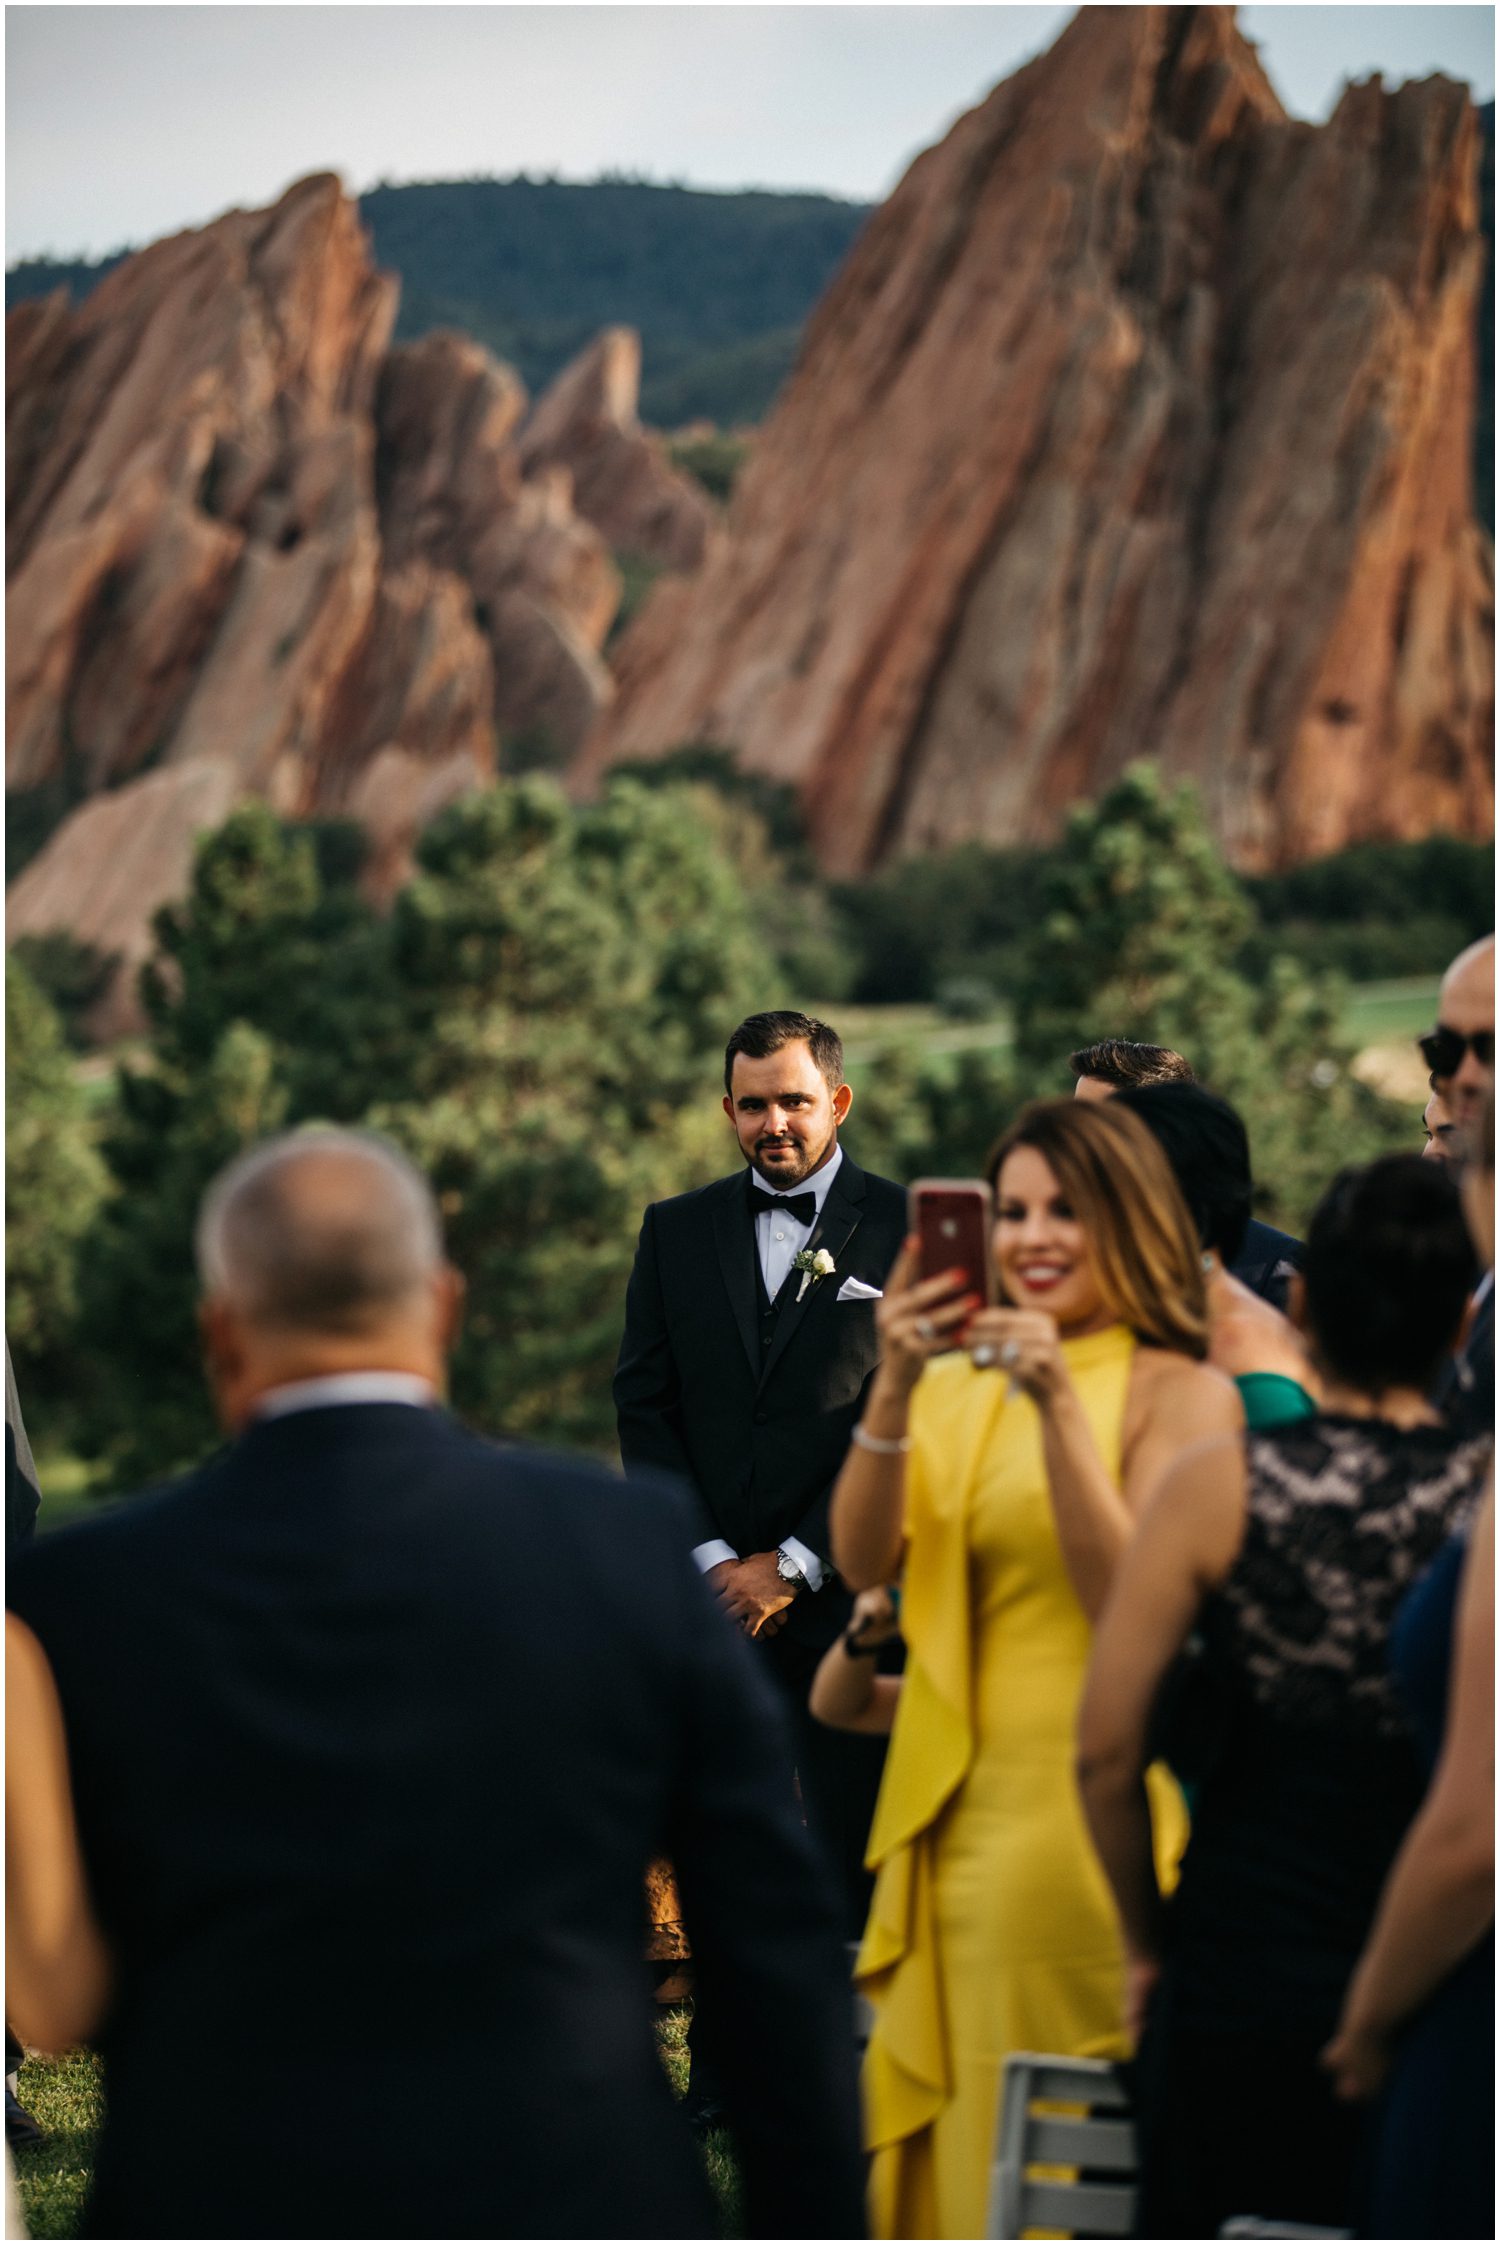 First look during the ceremony, Grooms reaction to bride coming down the aisle, Arrowhead Golf Club Wedding Photos, Colorado Wedding Photographer